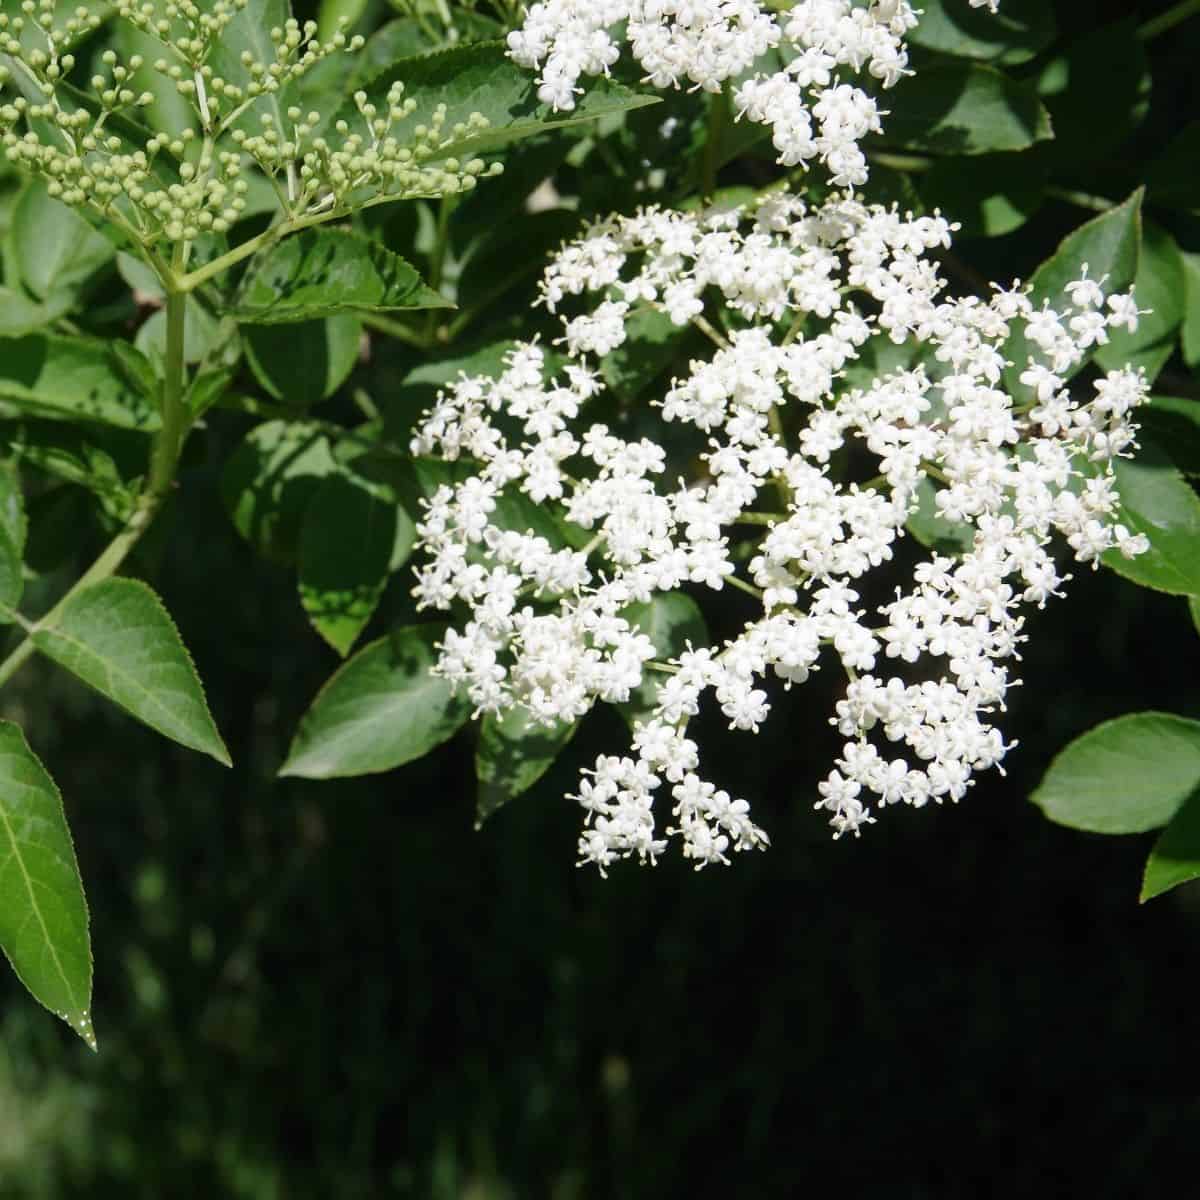 Close up of elder tree flowerhead with a cluster tiny white elderflowers.